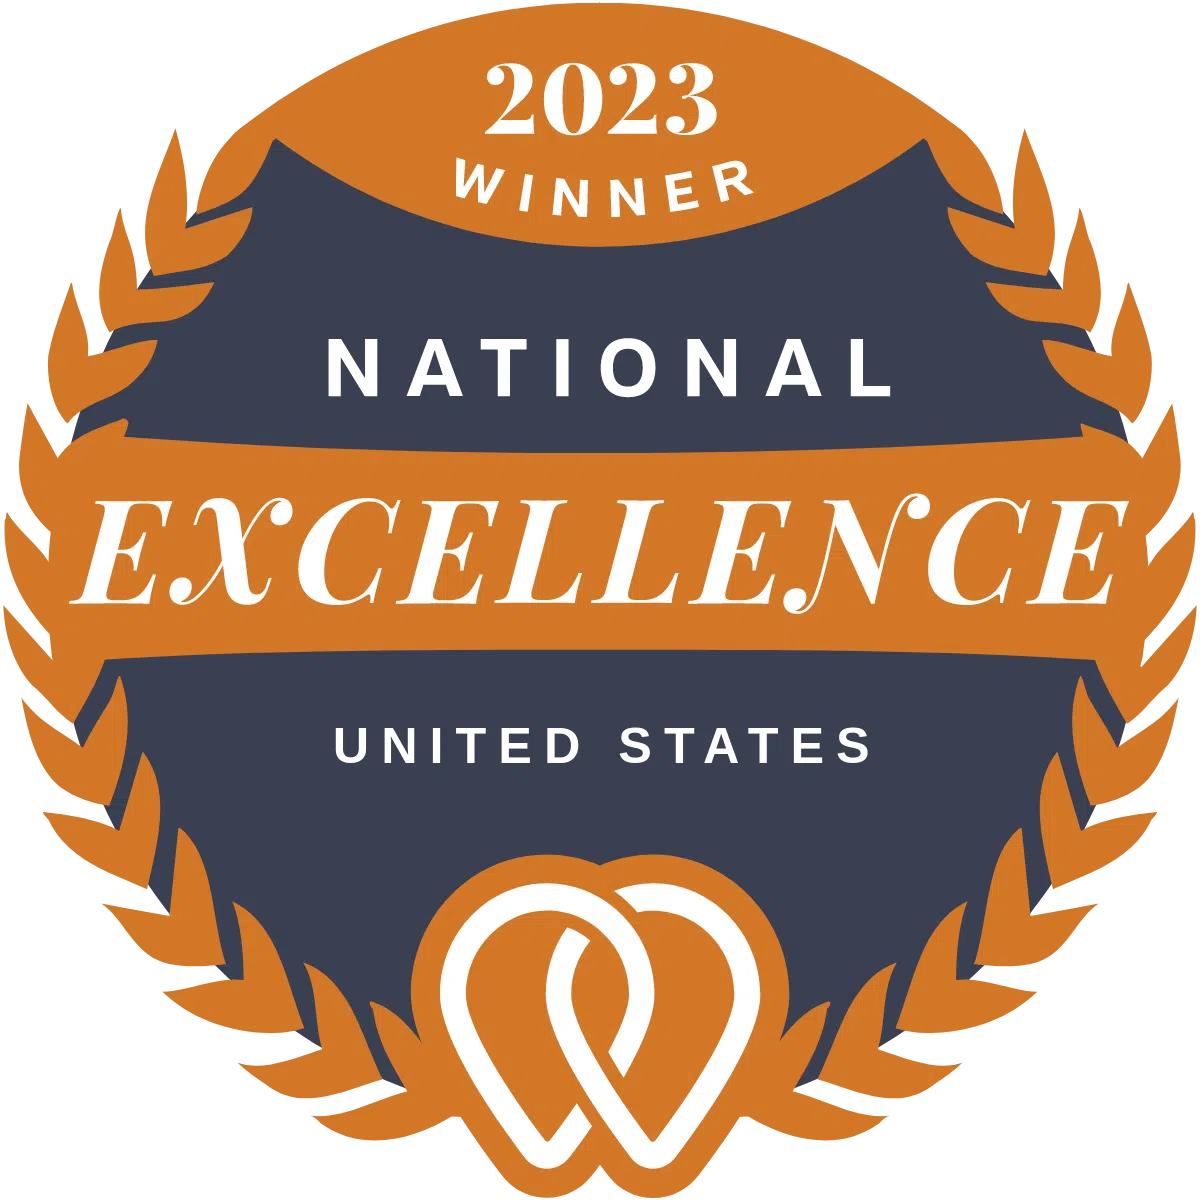 2023 National Excellence Winner in United States